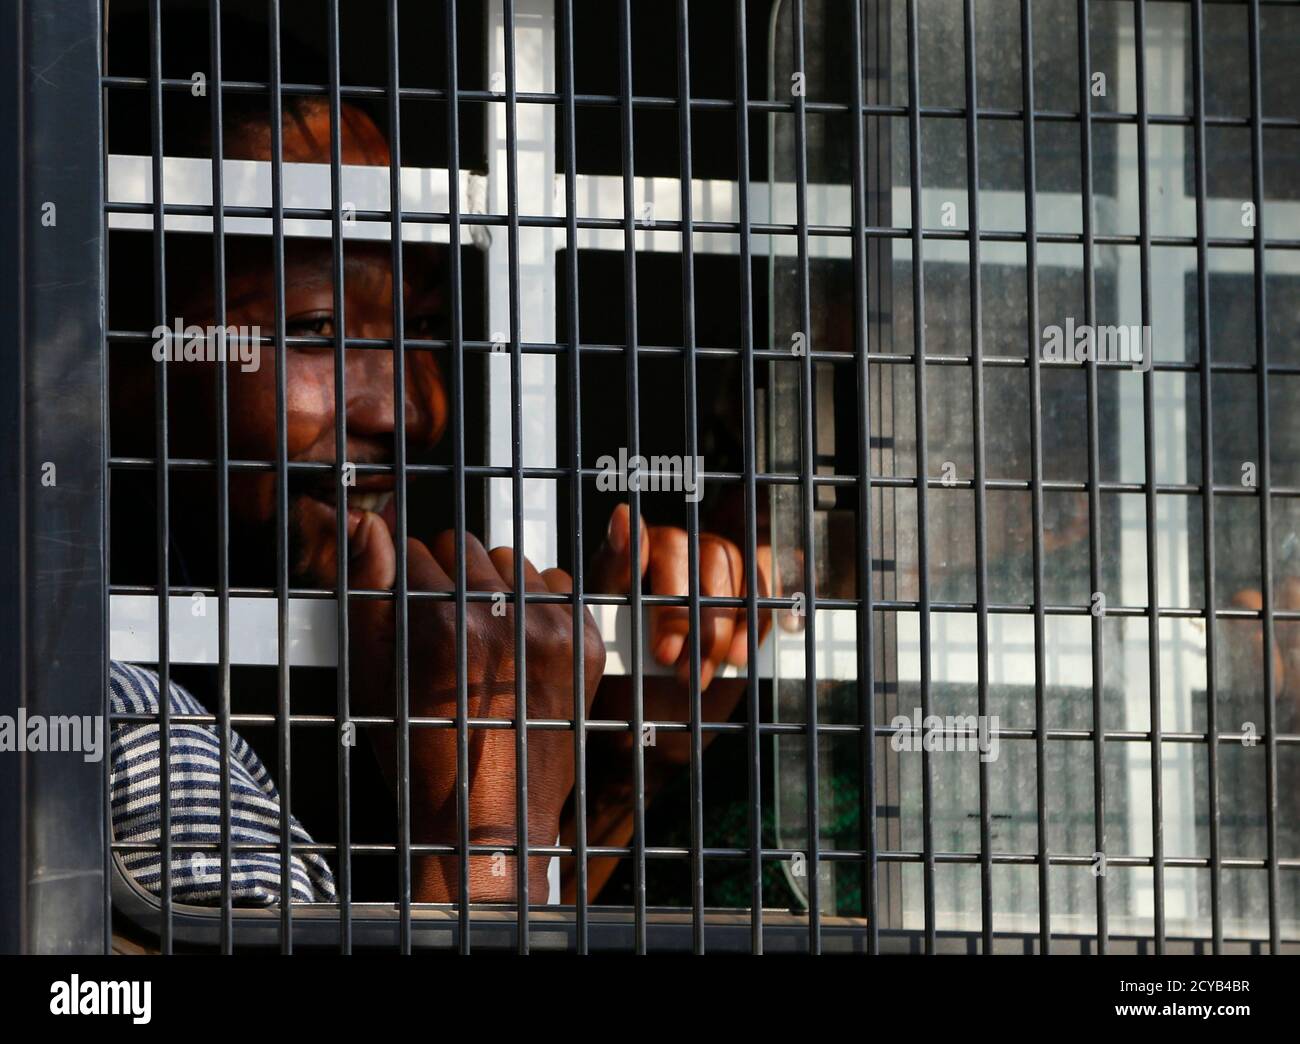 A detained miner peers out of a police van as it arrives at court in Ga Rankuwa, near Pretoria September 3, 2012. South Africa released on Monday the first of 270 miners detained more than two weeks ago after police shot dead 34 of their colleagues in a bid to break up a wildcat strike at Lonmin's Marikana platinum mine.The men were charged last week under an obscure apartheid-era security law with murdering their fellow miners, although state prosecutors withdrew the charges at the weekend following a public outcry. REUTERS/Mike Hutchings (SOUTH AFRICA - Tags: POLITICS BUSINESS COMMODITIES EM Stock Photo